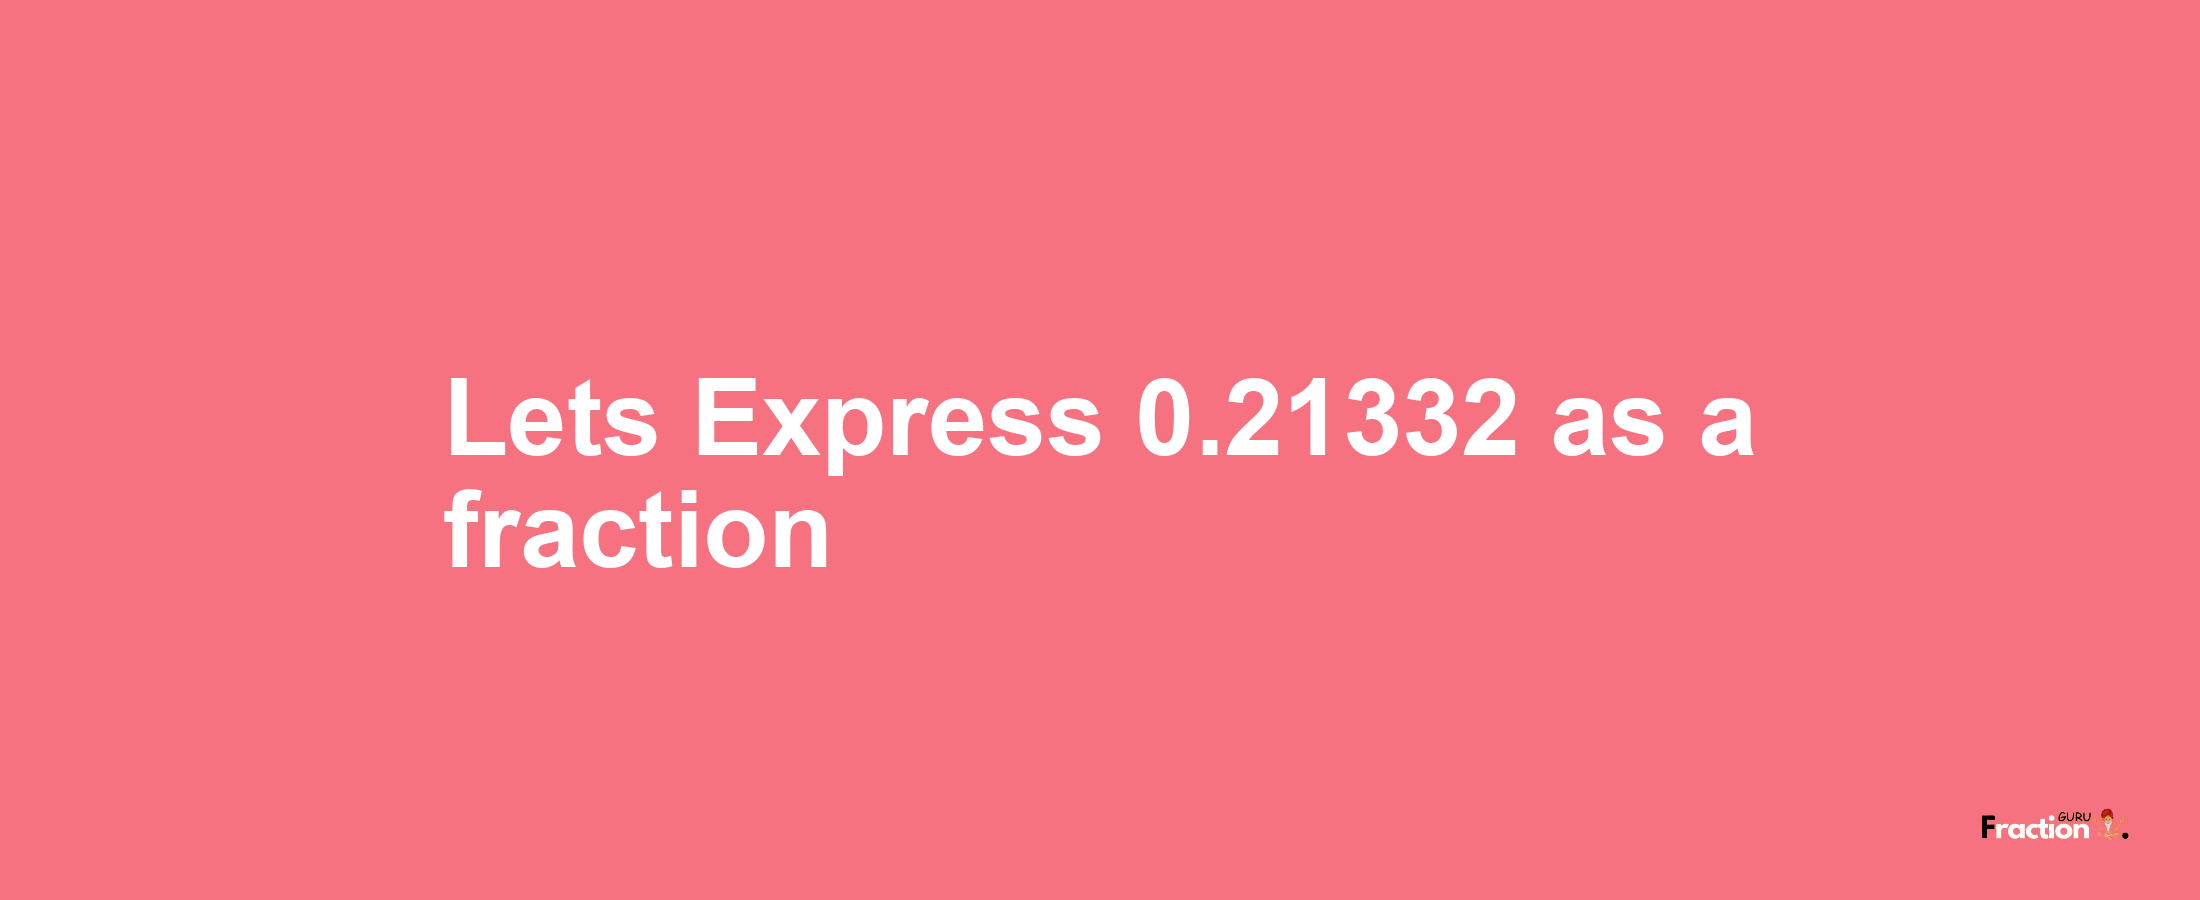 Lets Express 0.21332 as afraction